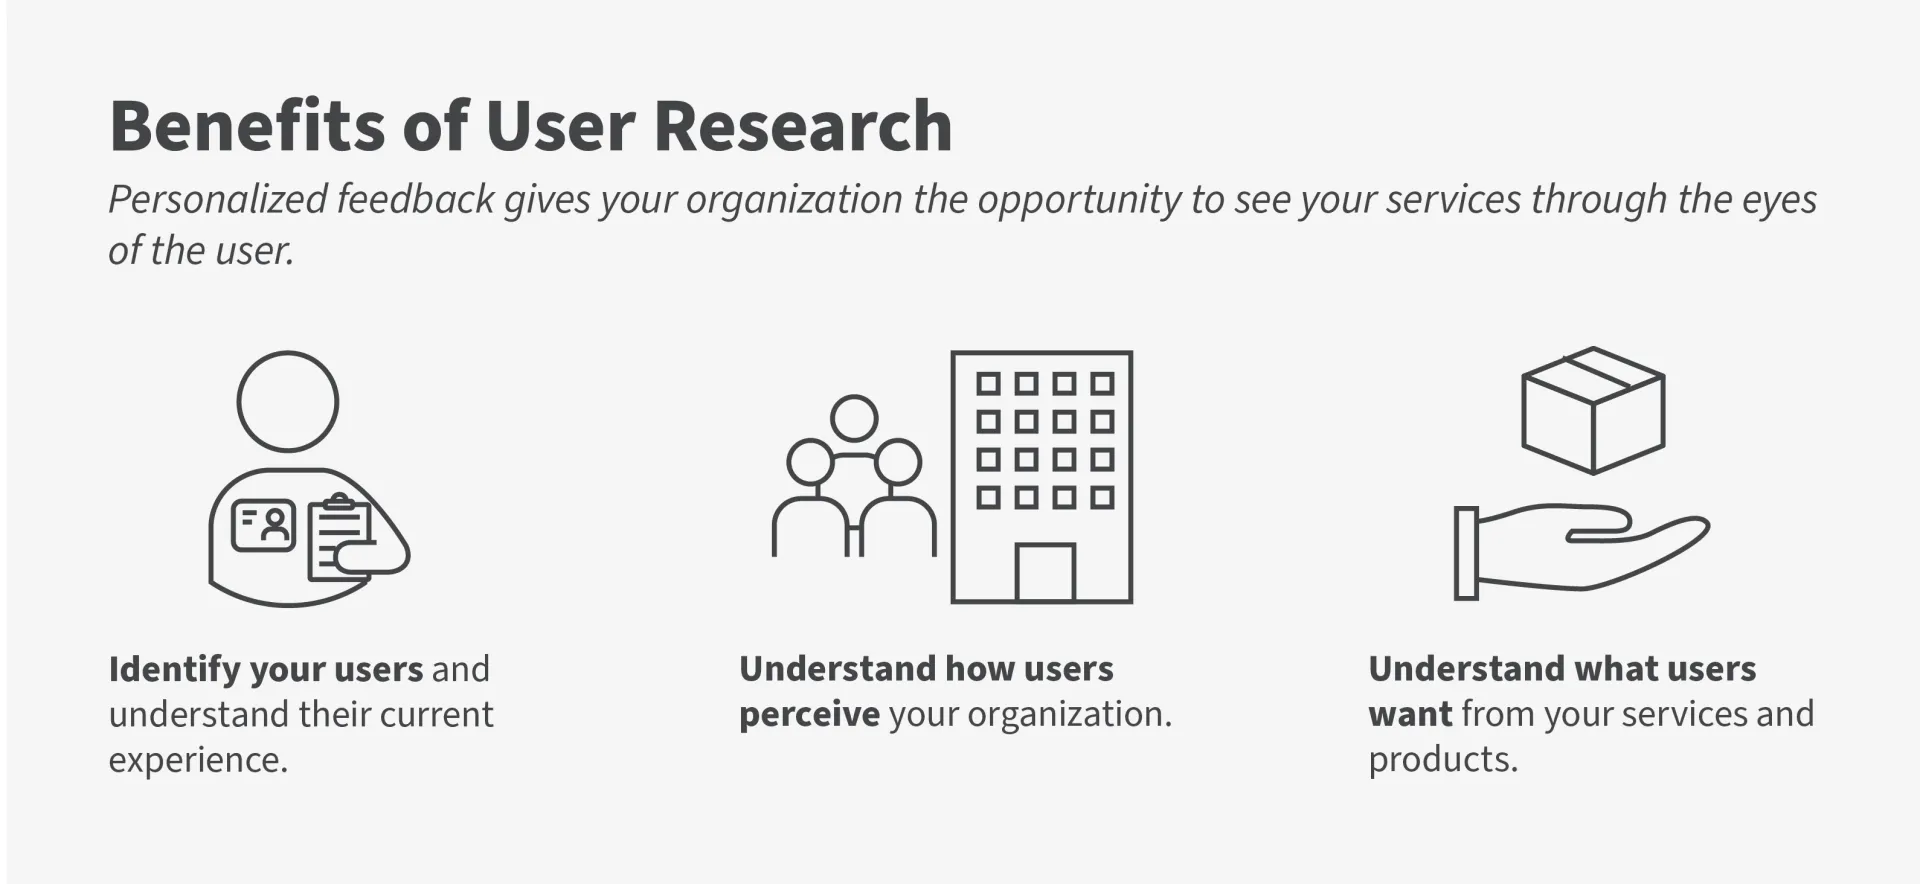 Infographic with three icons showing the benefits of user research being identifying users, understand how they perceive your organization, and understand what they want.